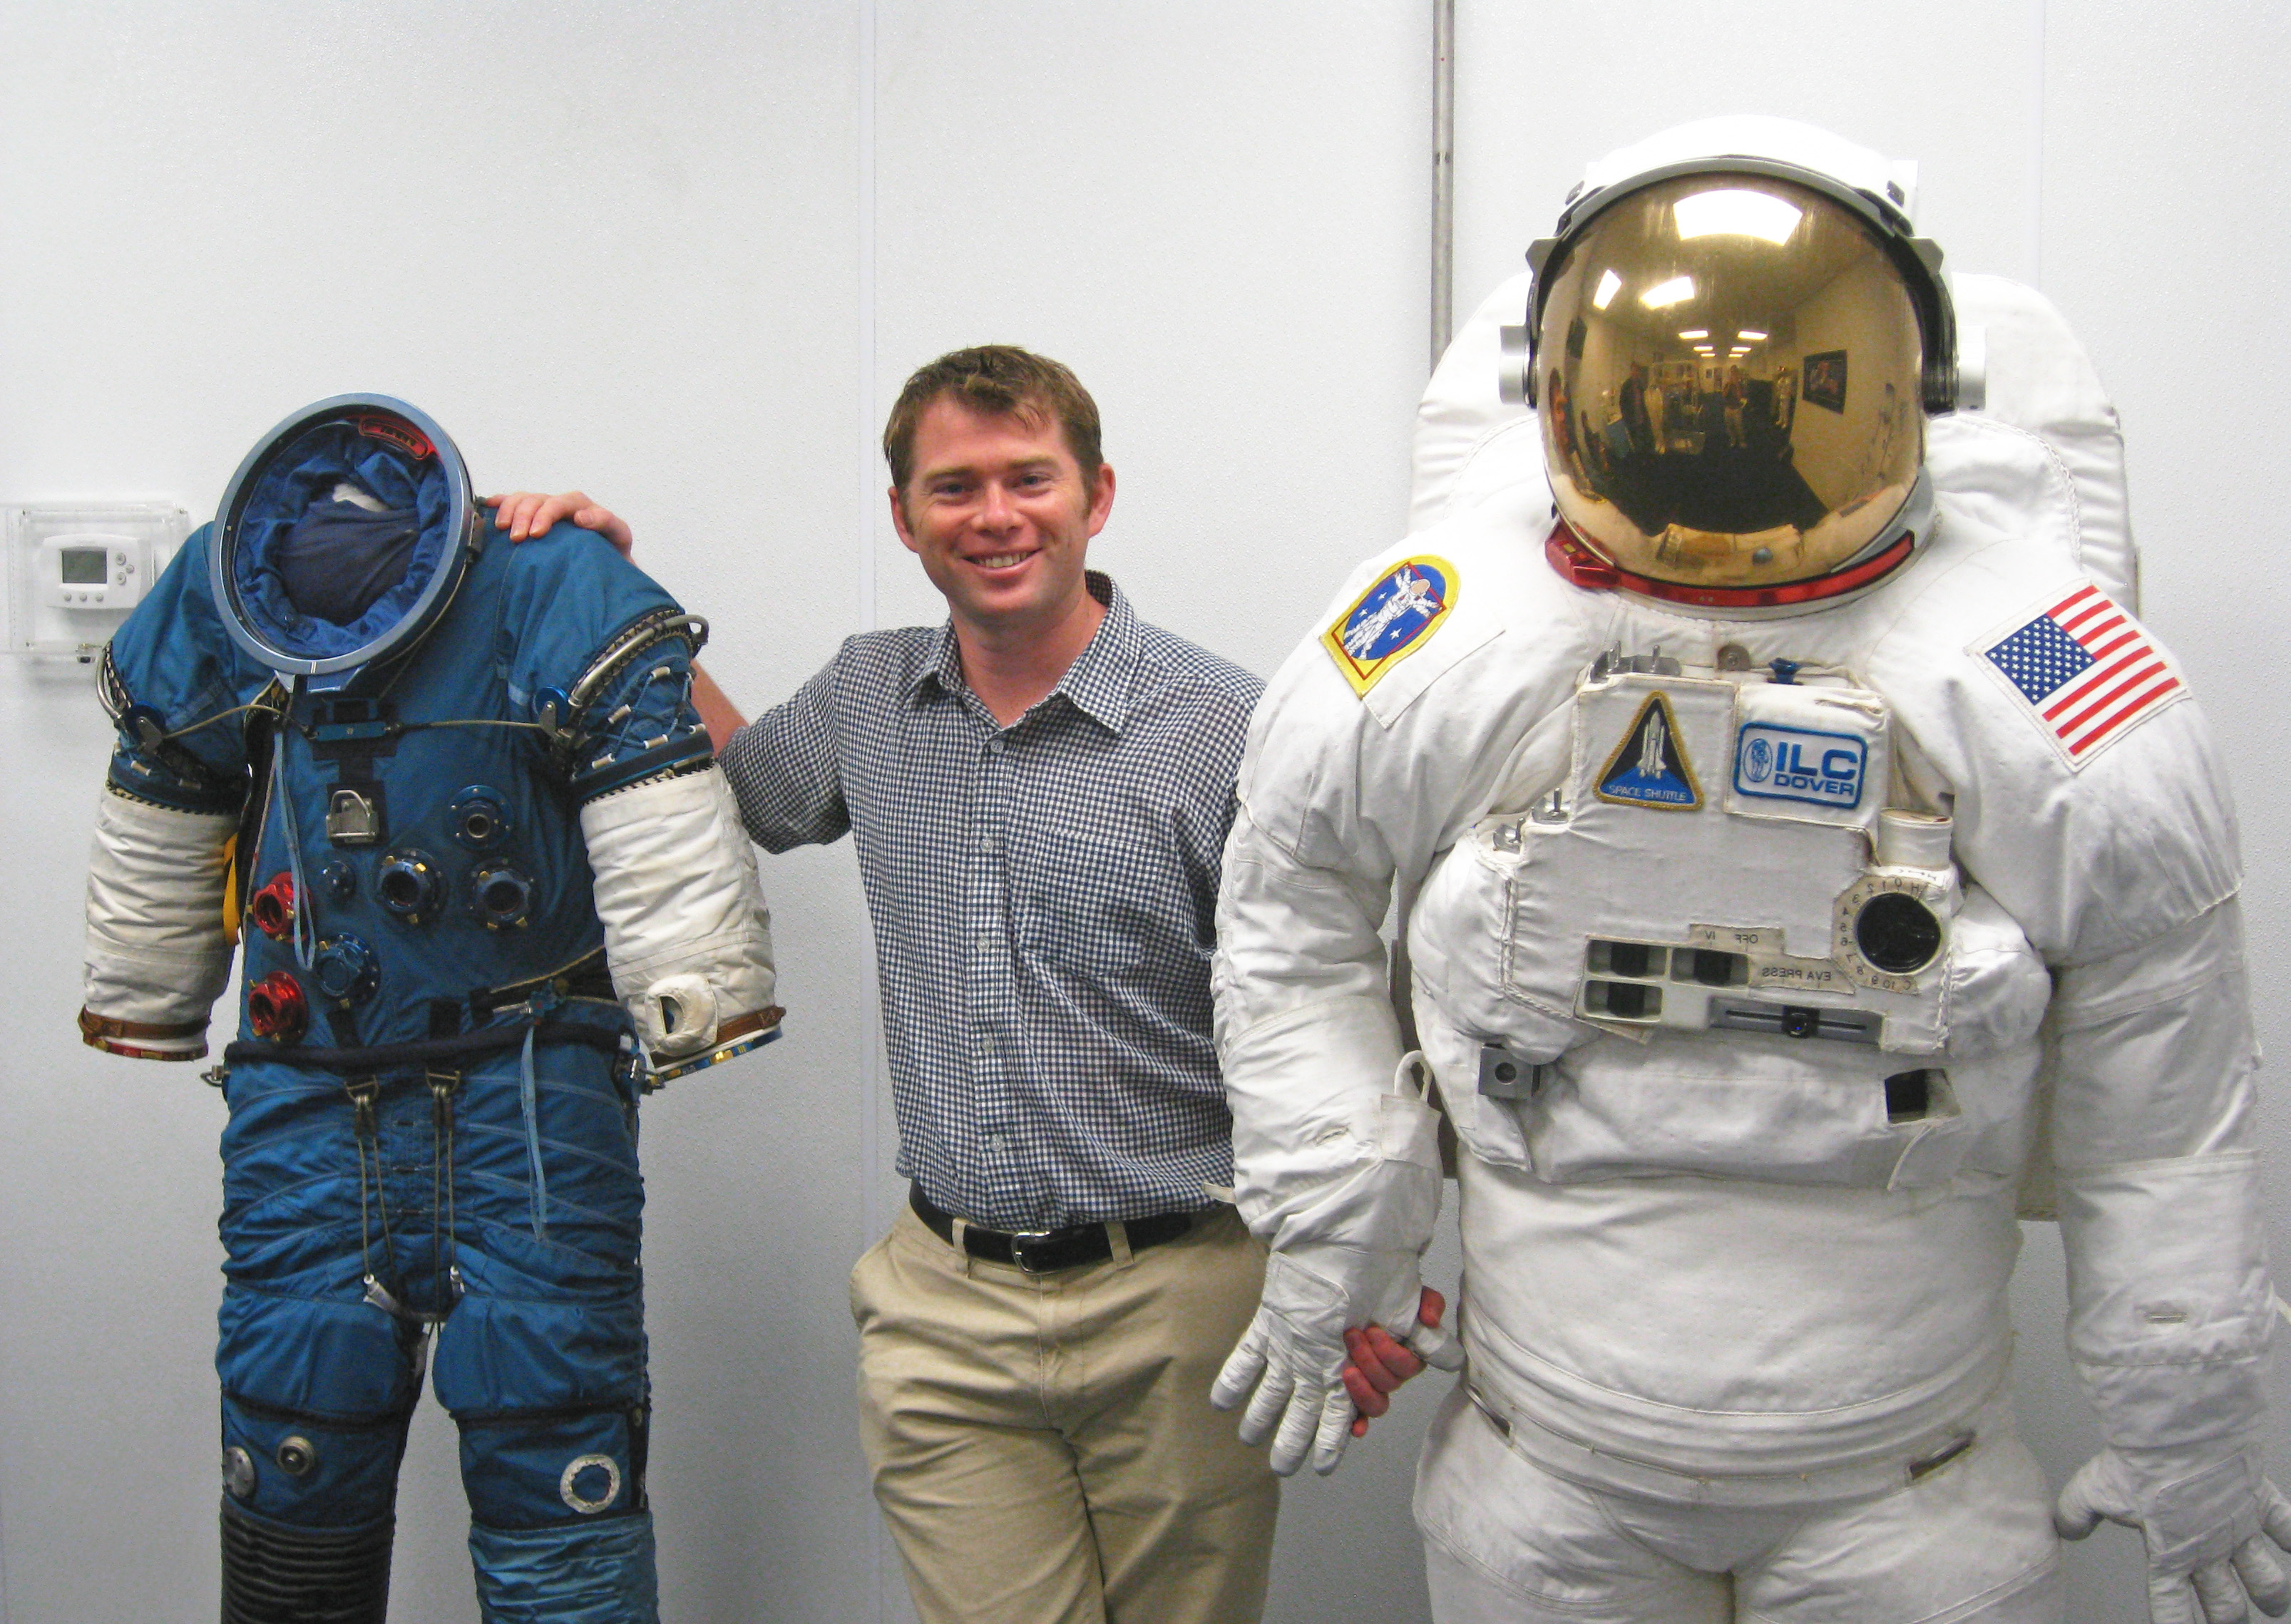 RMIT alumnus and Chief Engineer at Human Aerospace, Dr James Waldie, poses with NASA Extravehicular Activity suits used for spacewalking.